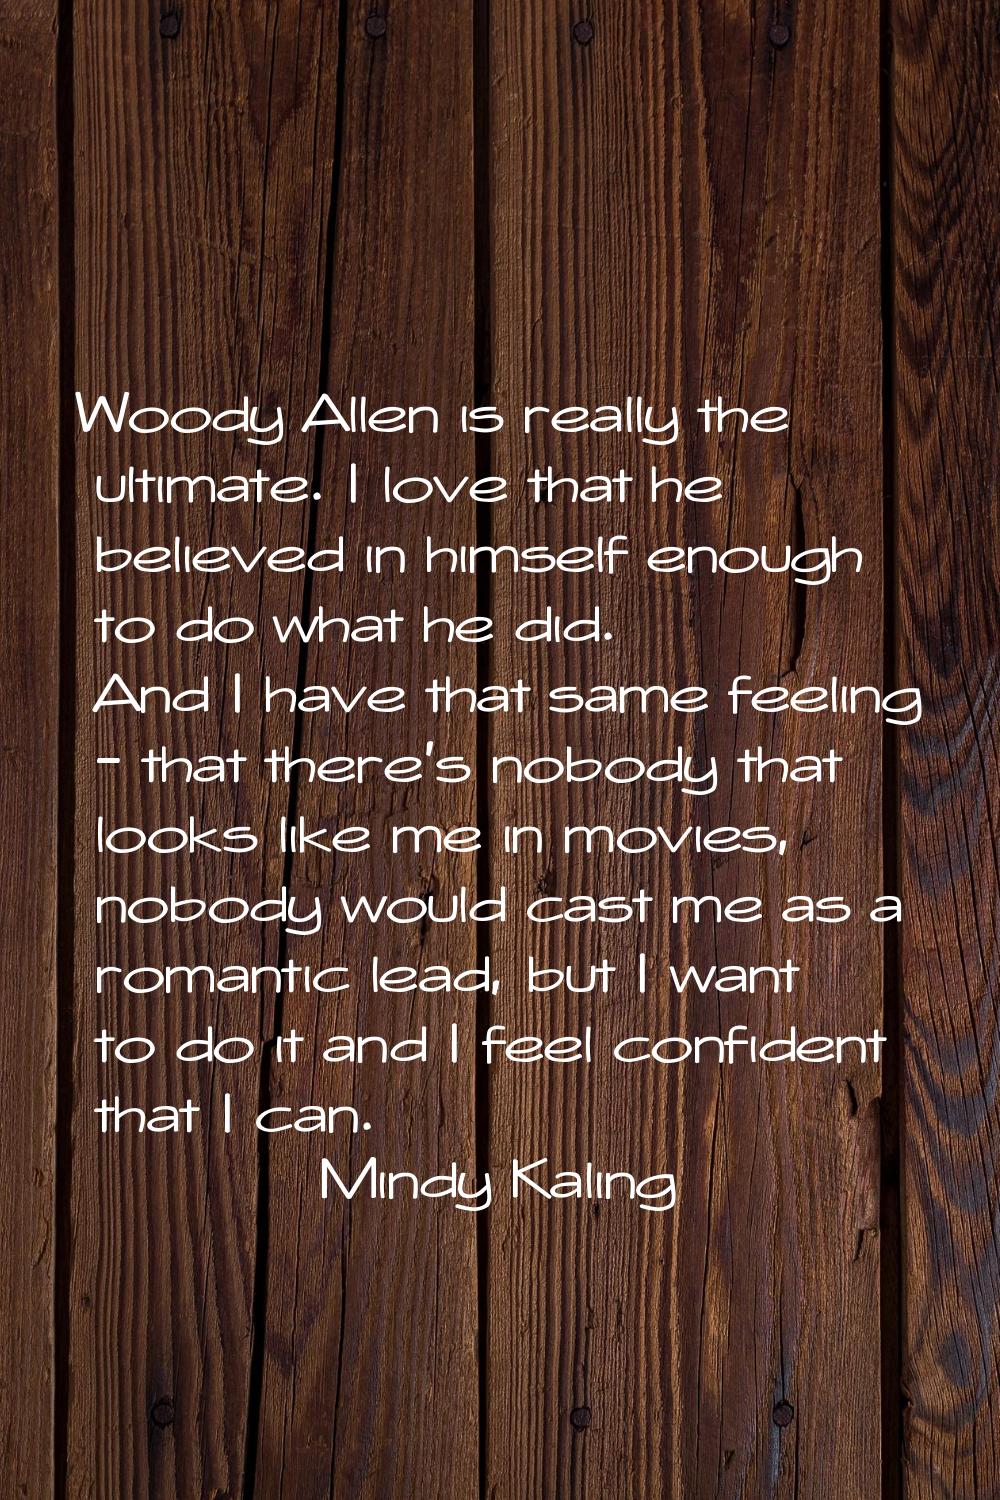 Woody Allen is really the ultimate. I love that he believed in himself enough to do what he did. An